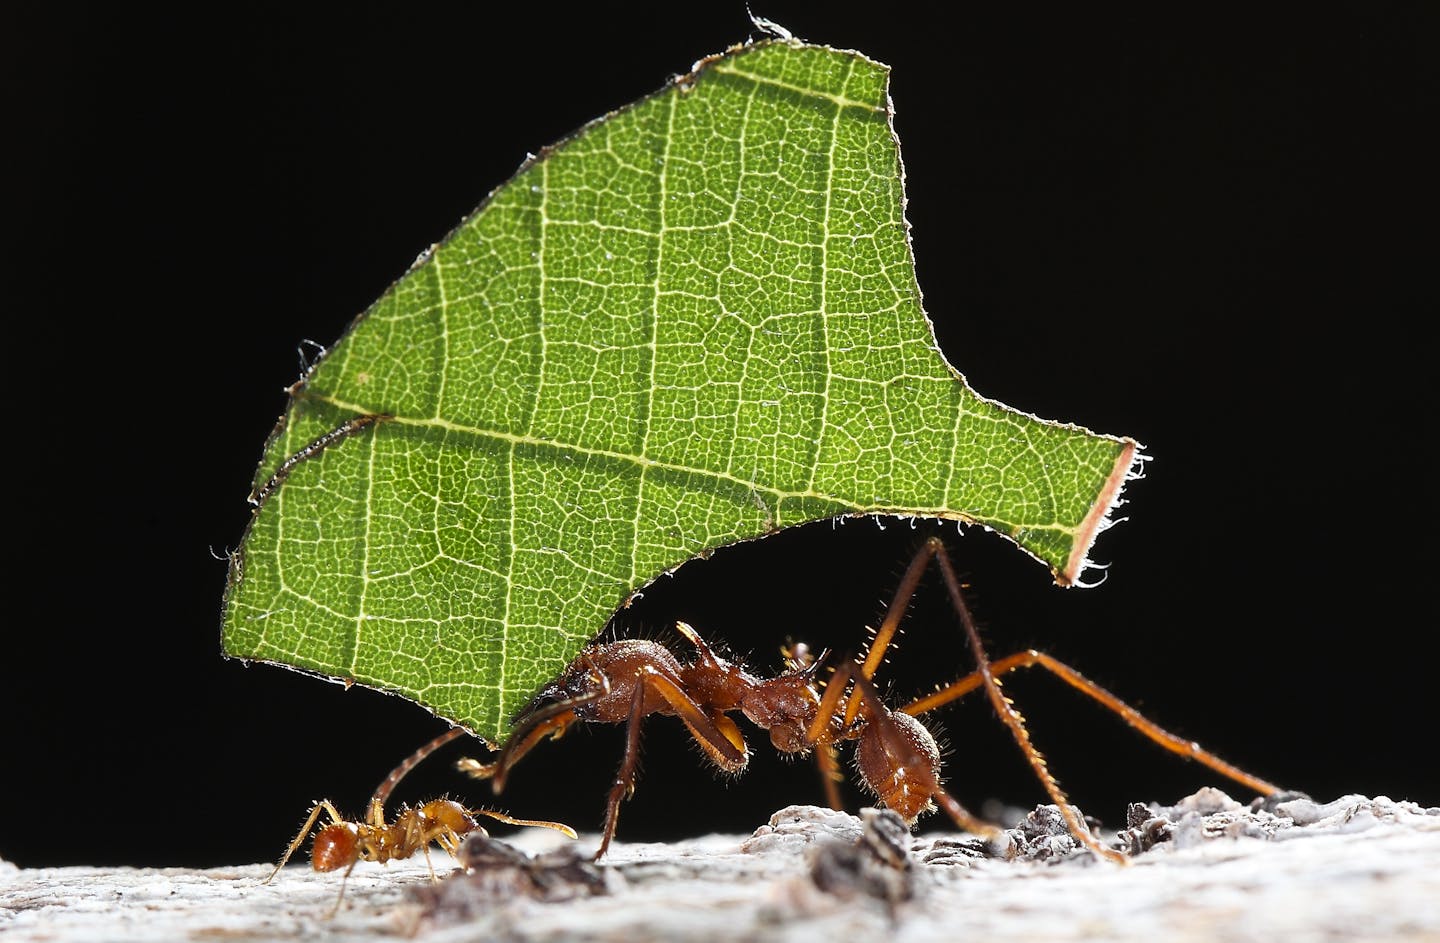 The caste system and gardening proficiency of leafcutter ants